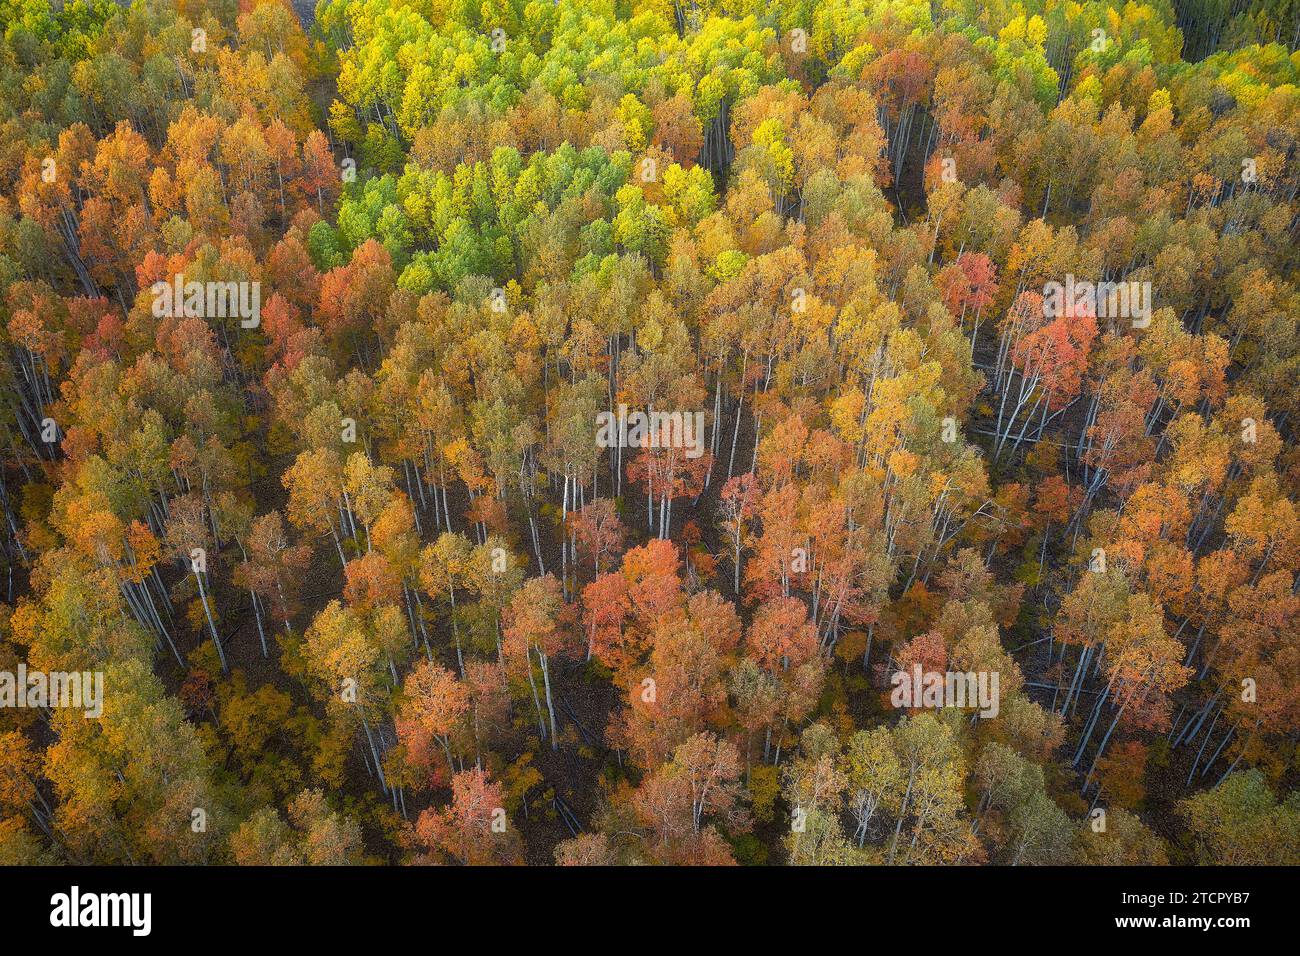 Aerial view of deciduous trees in autumn hues, set against a vibrant blue sky Stock Photo